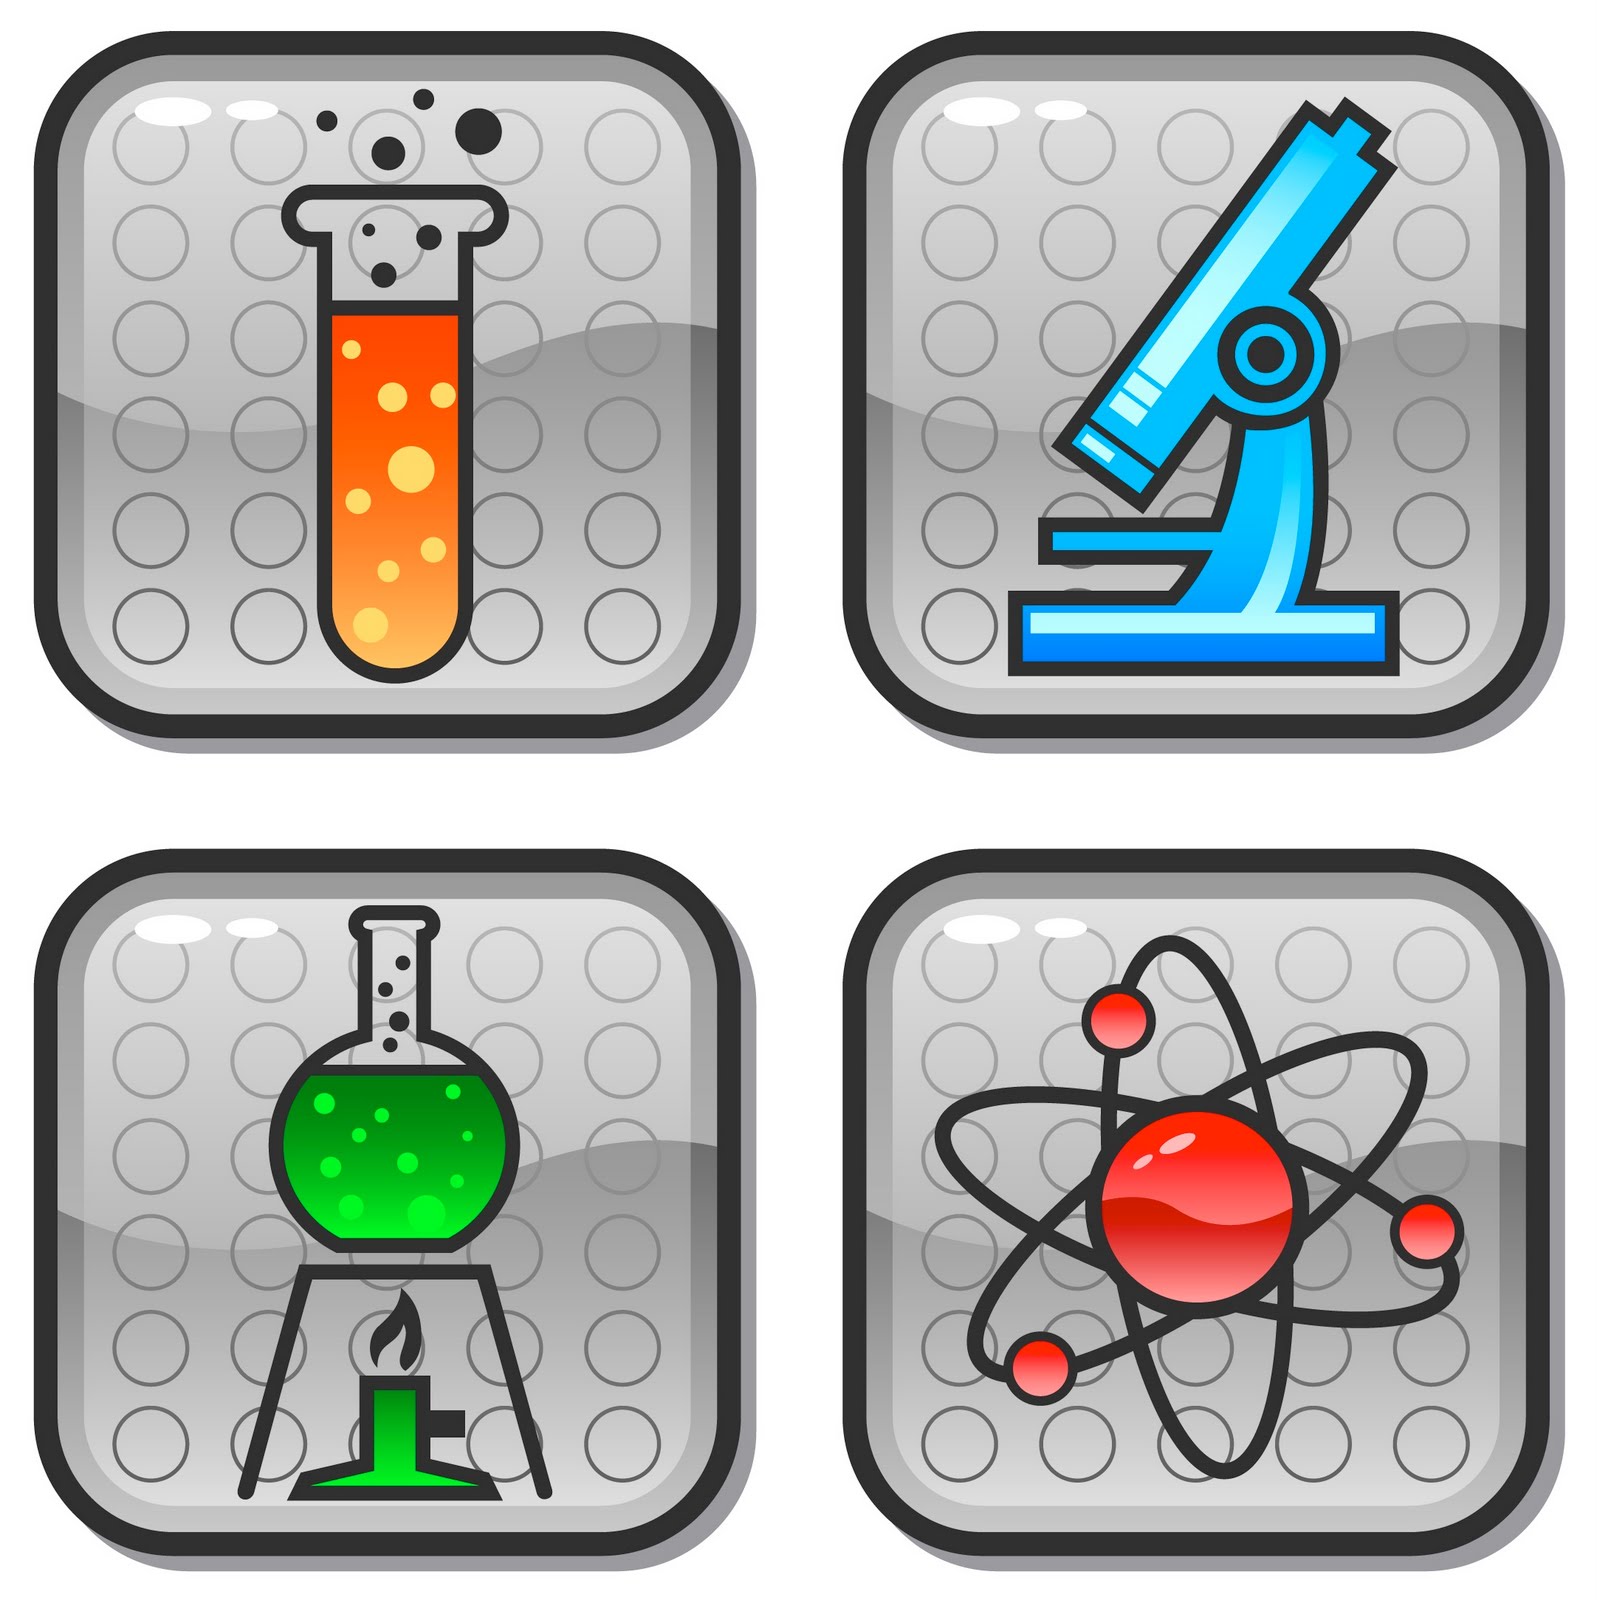 Free Science Images Cliparts 